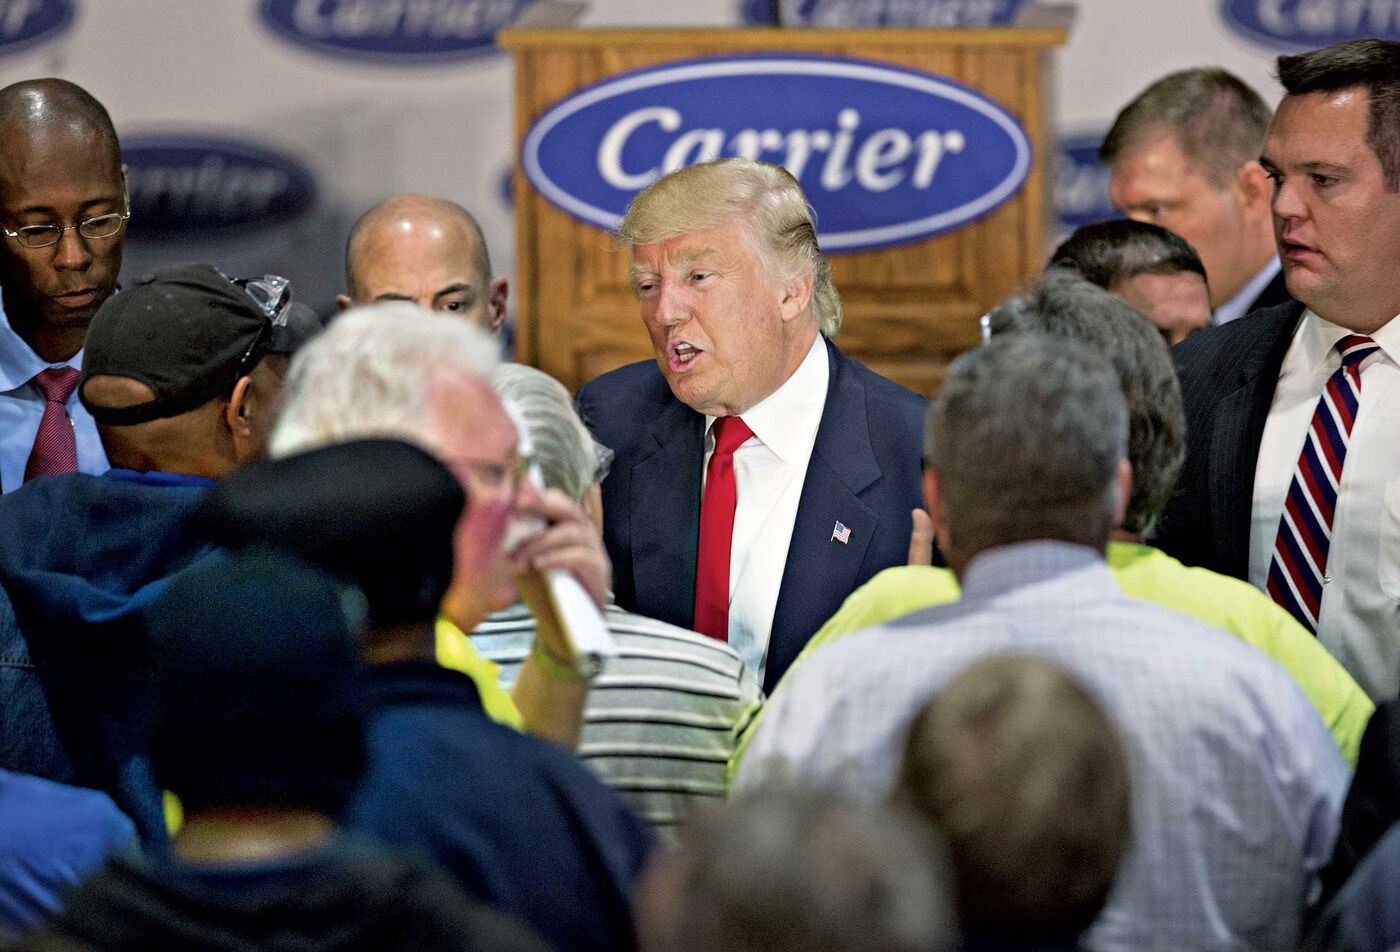 Trump at Carrier on Dec. 1. His deal saved 730 jobs, for now.